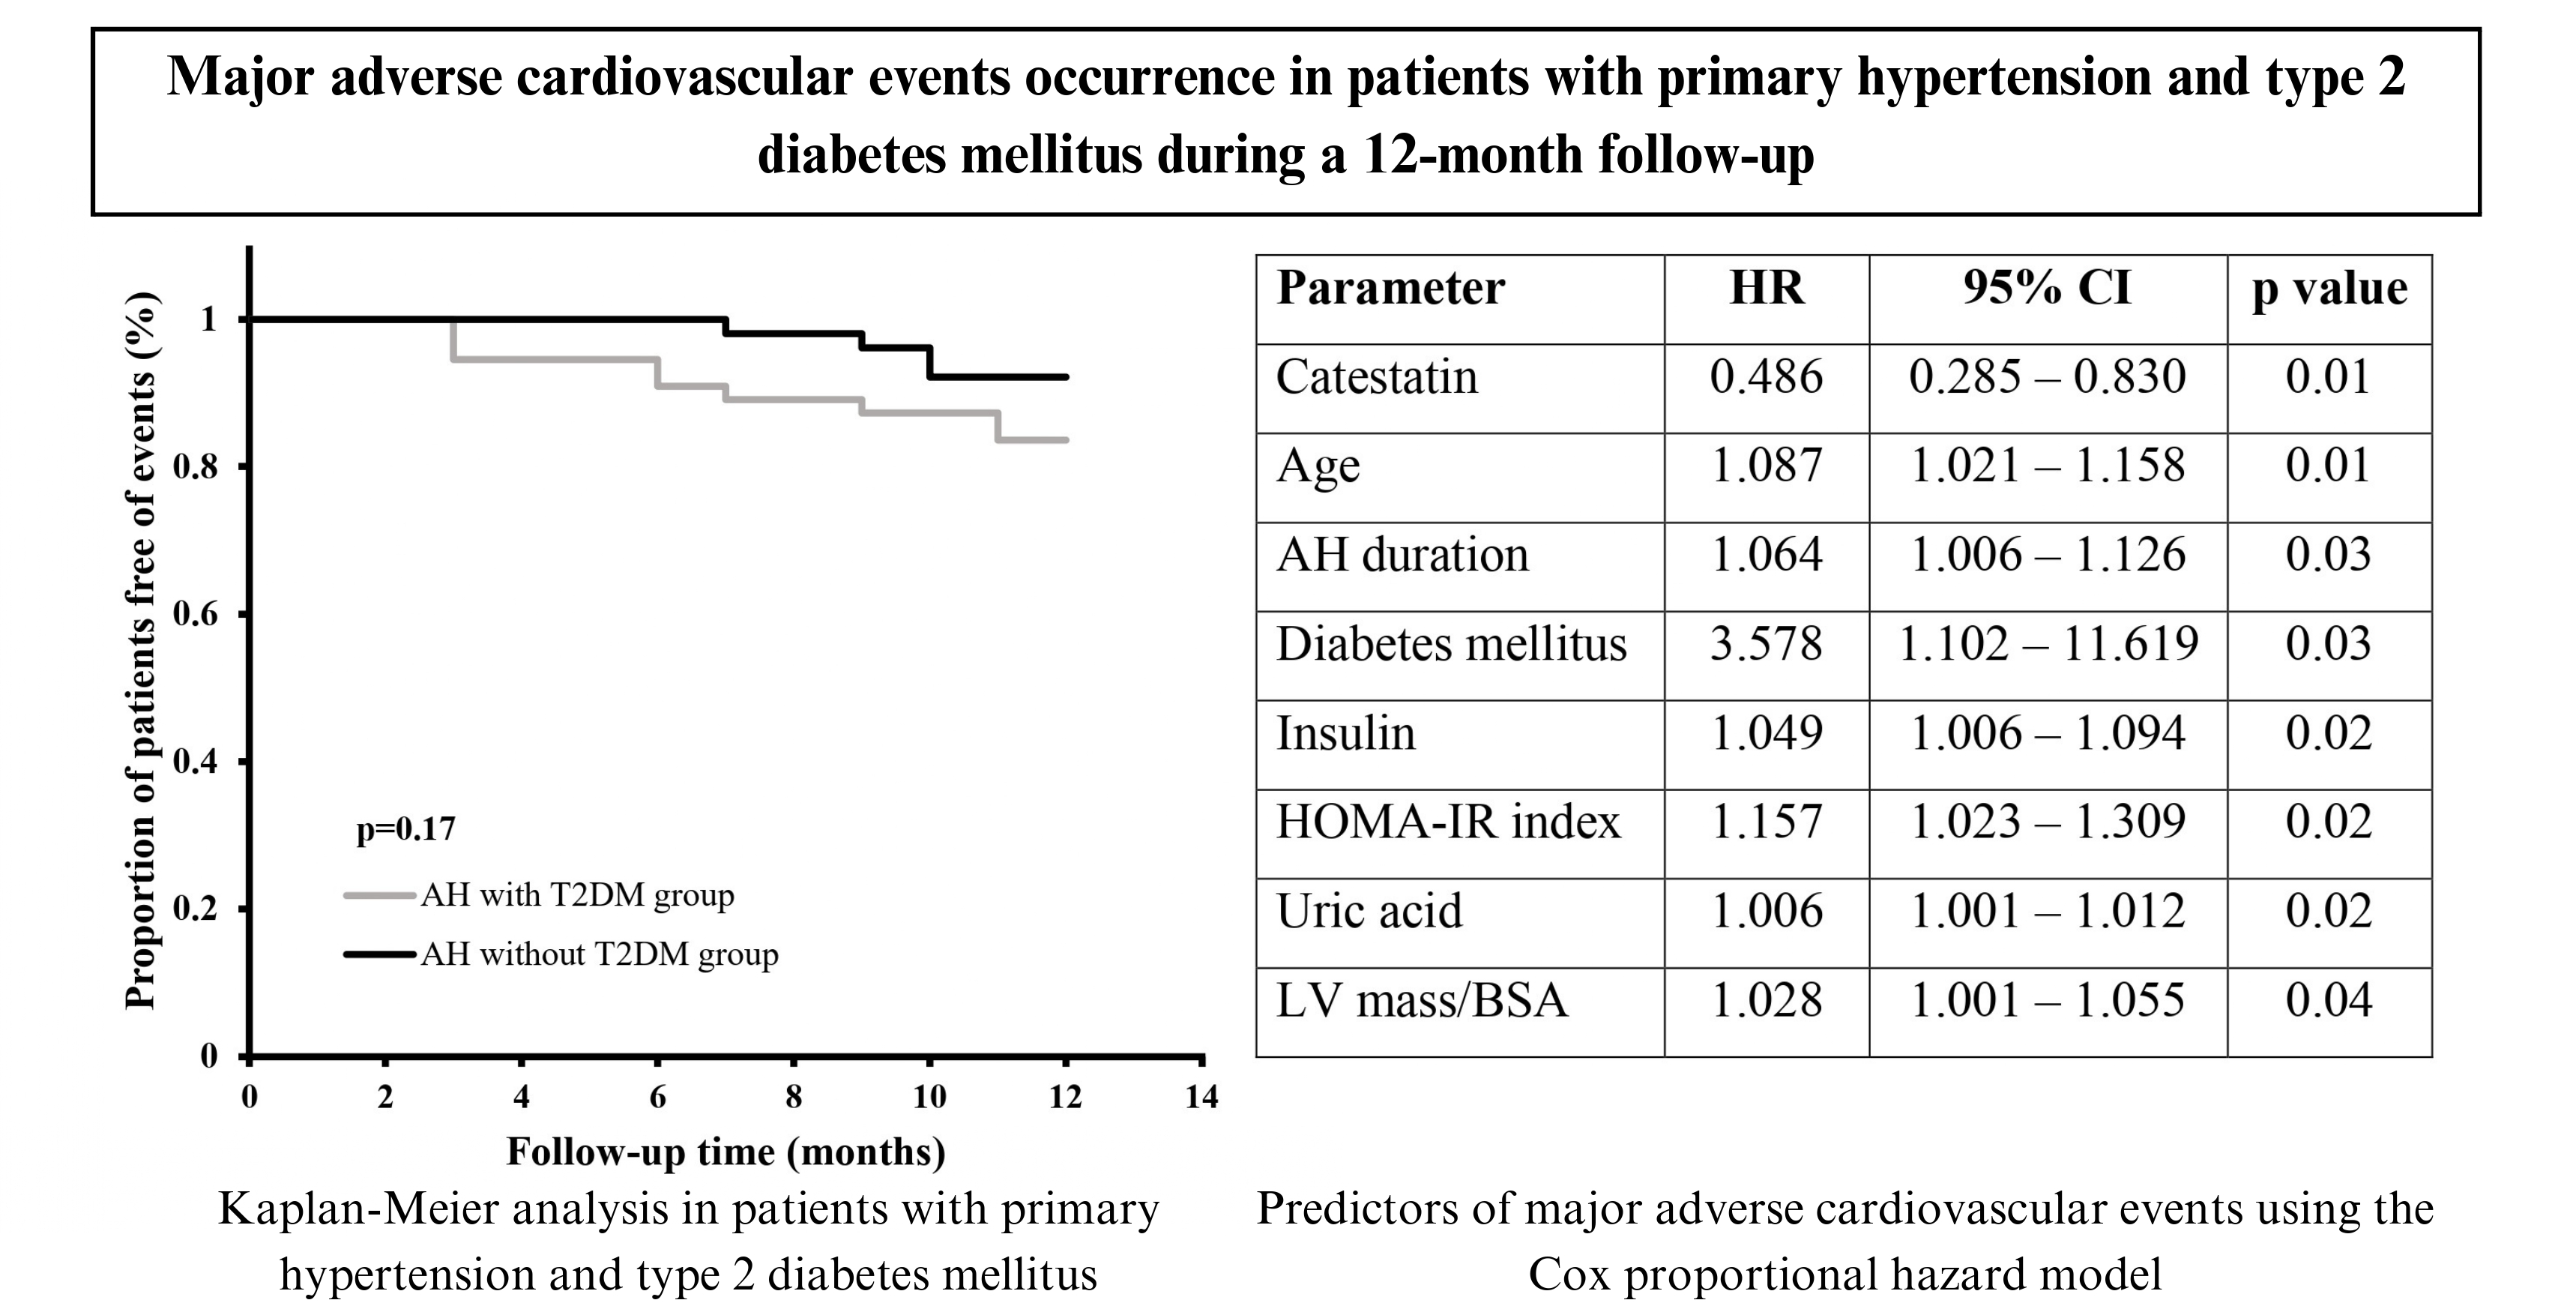 Prognostic significance of catestatin in patients with primary hypertension and type 2 diabetes mellitus